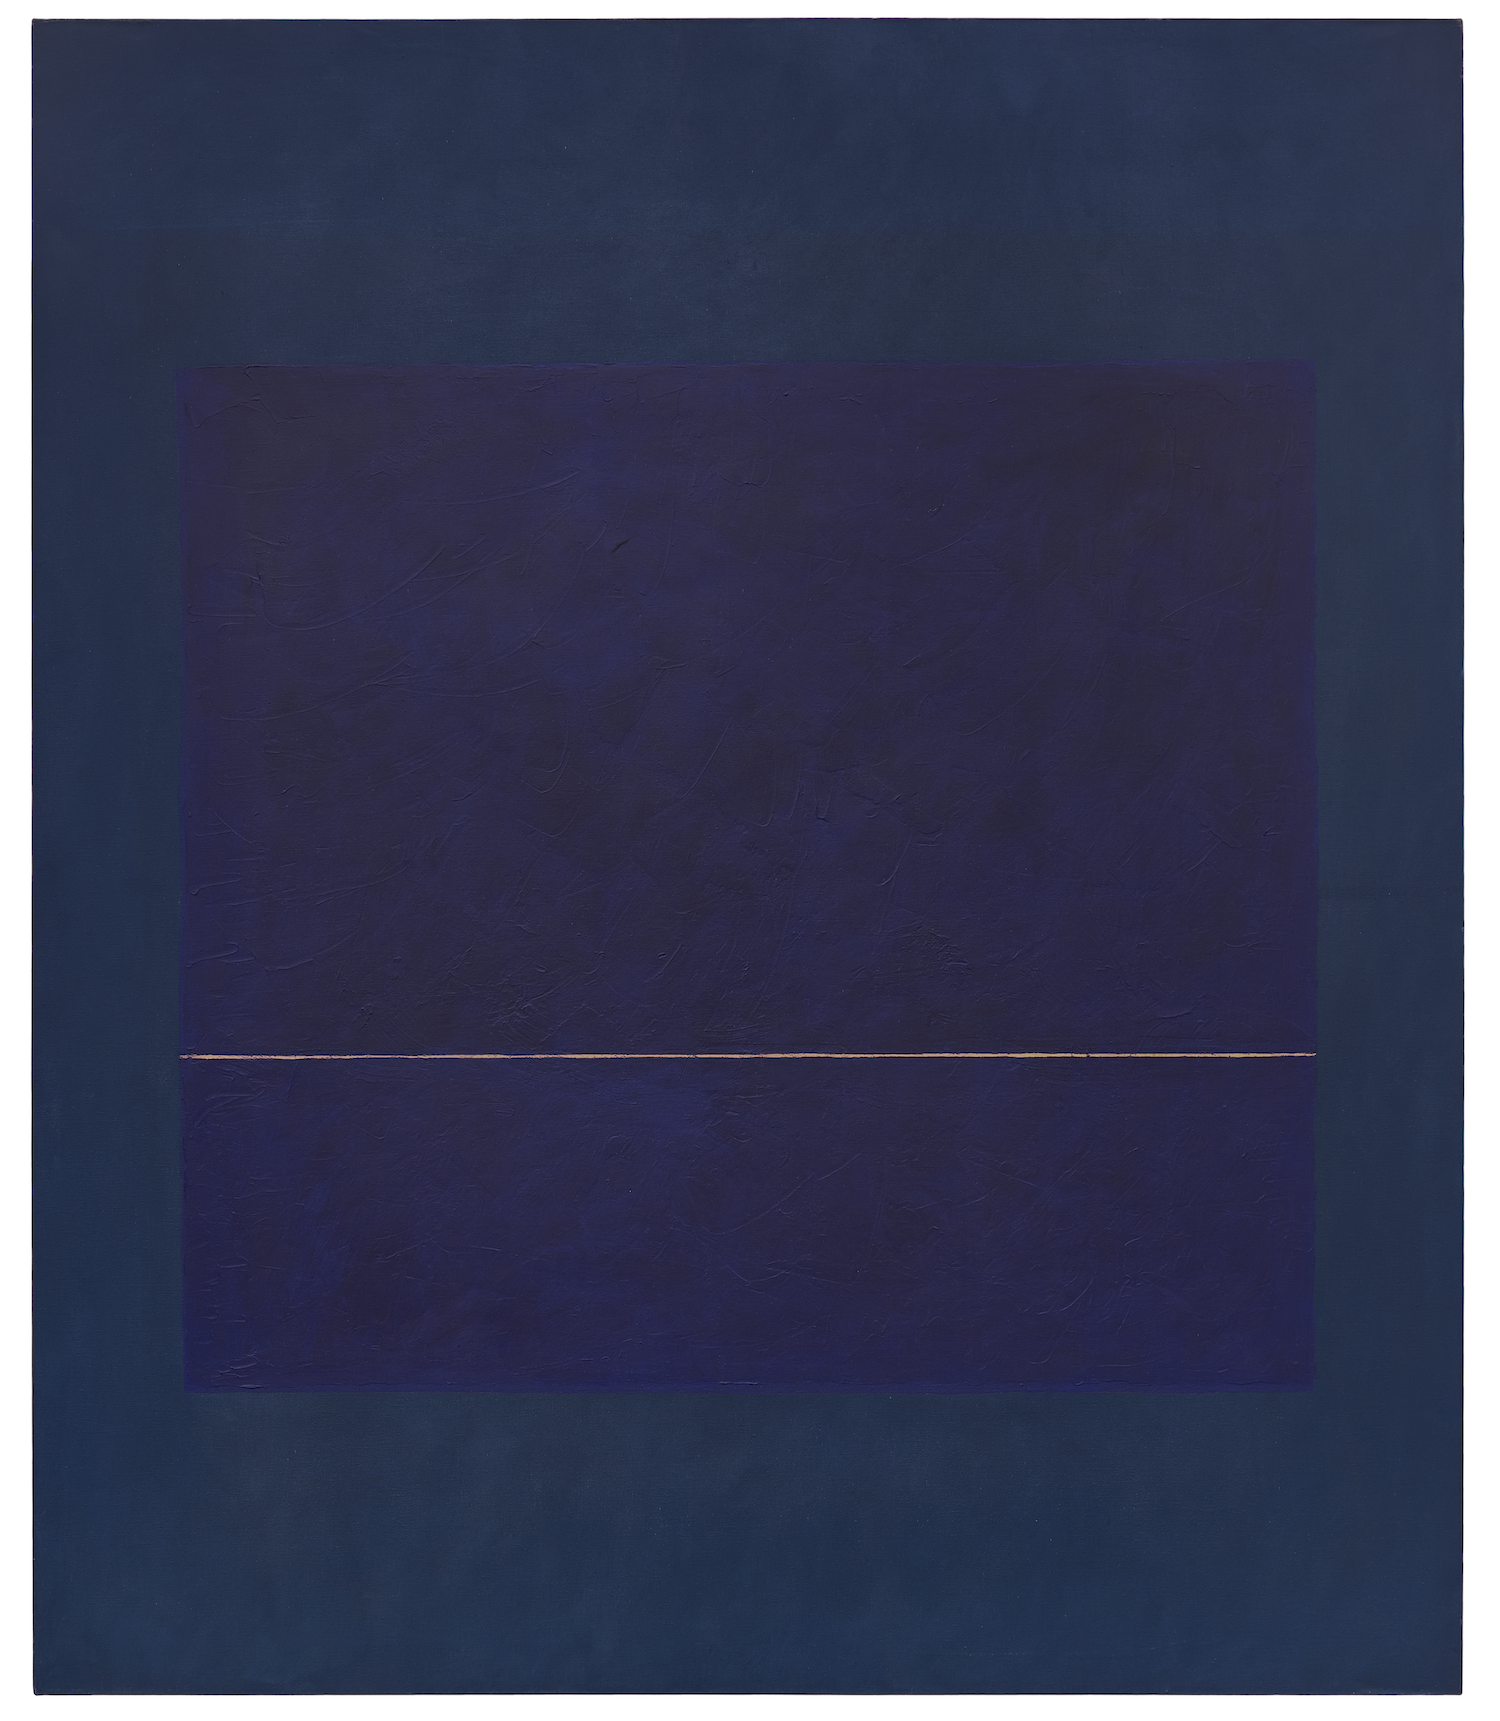  Virginia Jaramillo (American, born 1939),   Blue Space  , 1974, oil on canvas, 82 x 70 inches, The John and Susan Horseman Collection, Courtesy of the Horseman Foundation, St. Louis, Missouri. © Virginia Jaramillo. Image courtesy of the artist and H